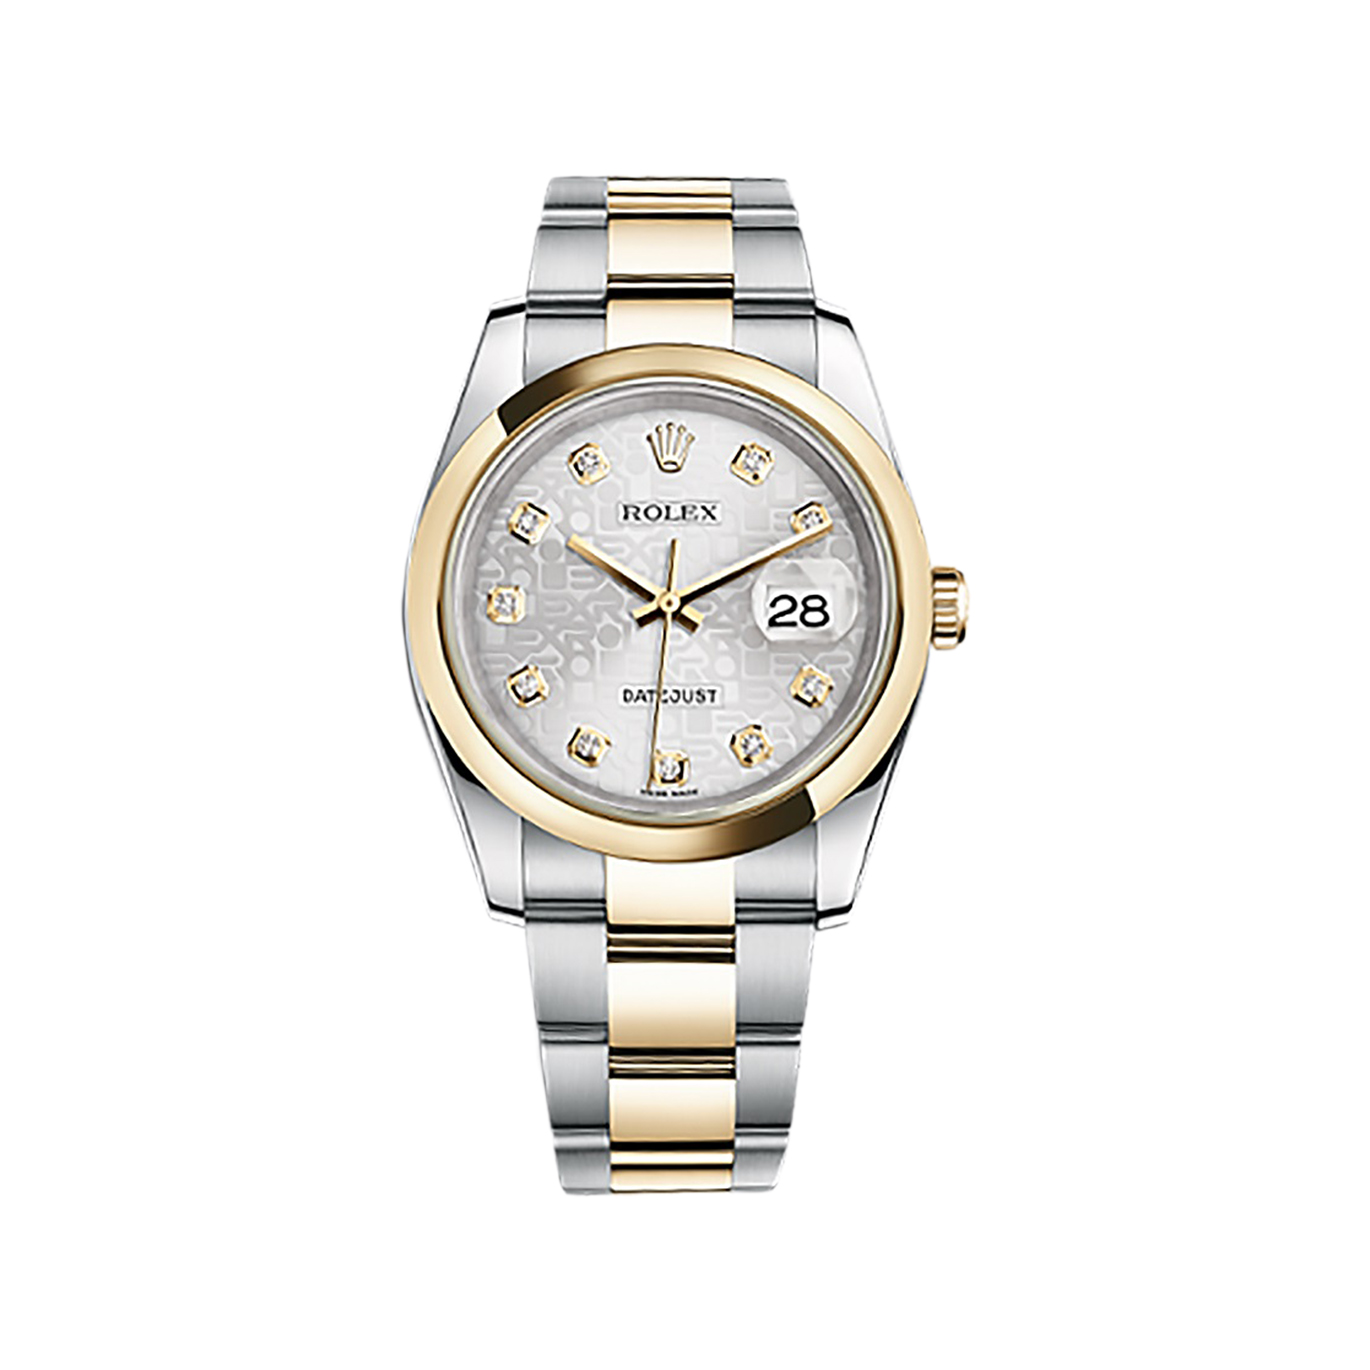 Datejust 36 116203 Gold & Stainless Steel Watch (Silver Jubilee Design Set with Diamonds)